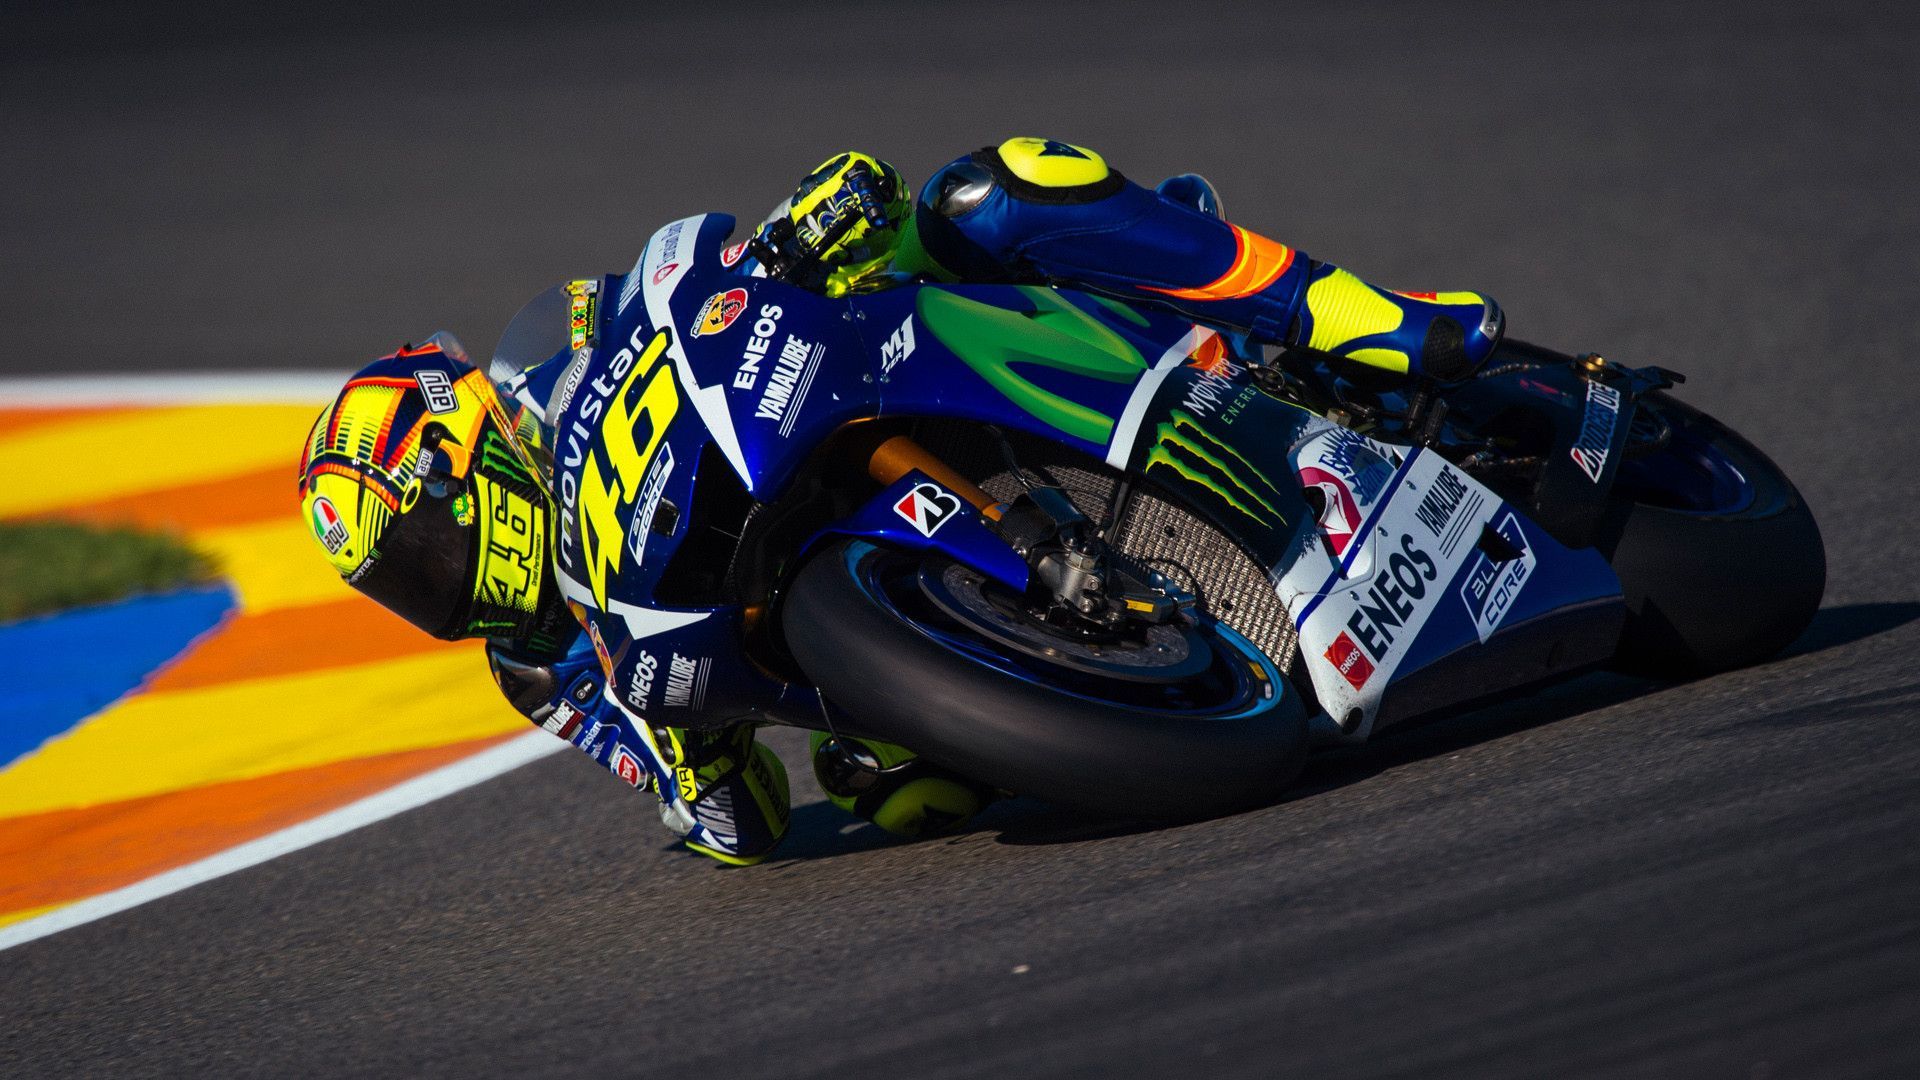 VR46 2021 Wallpapers - Wallpaper Cave